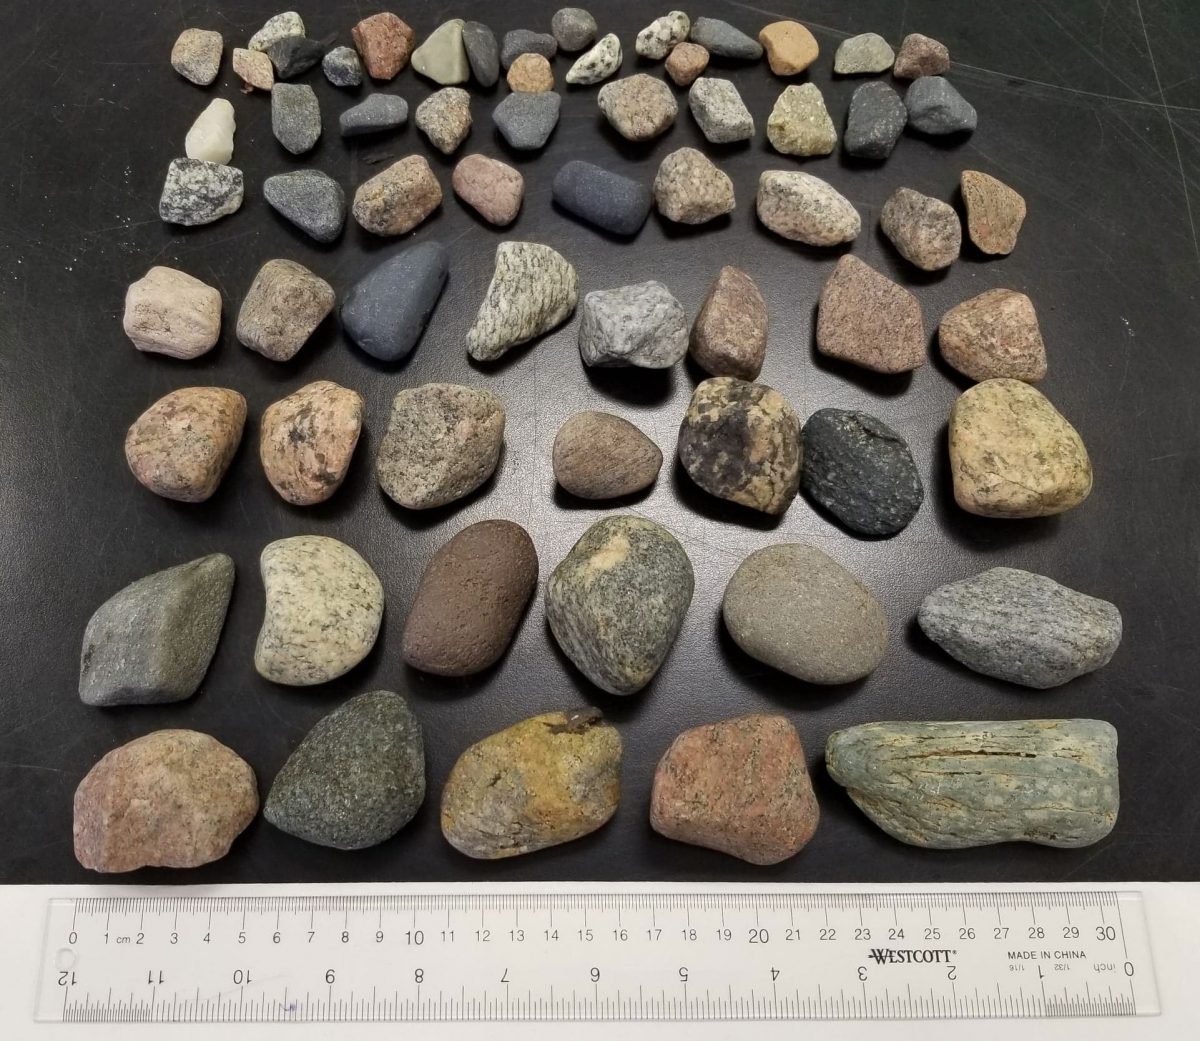 rocks found in a seal's stomch